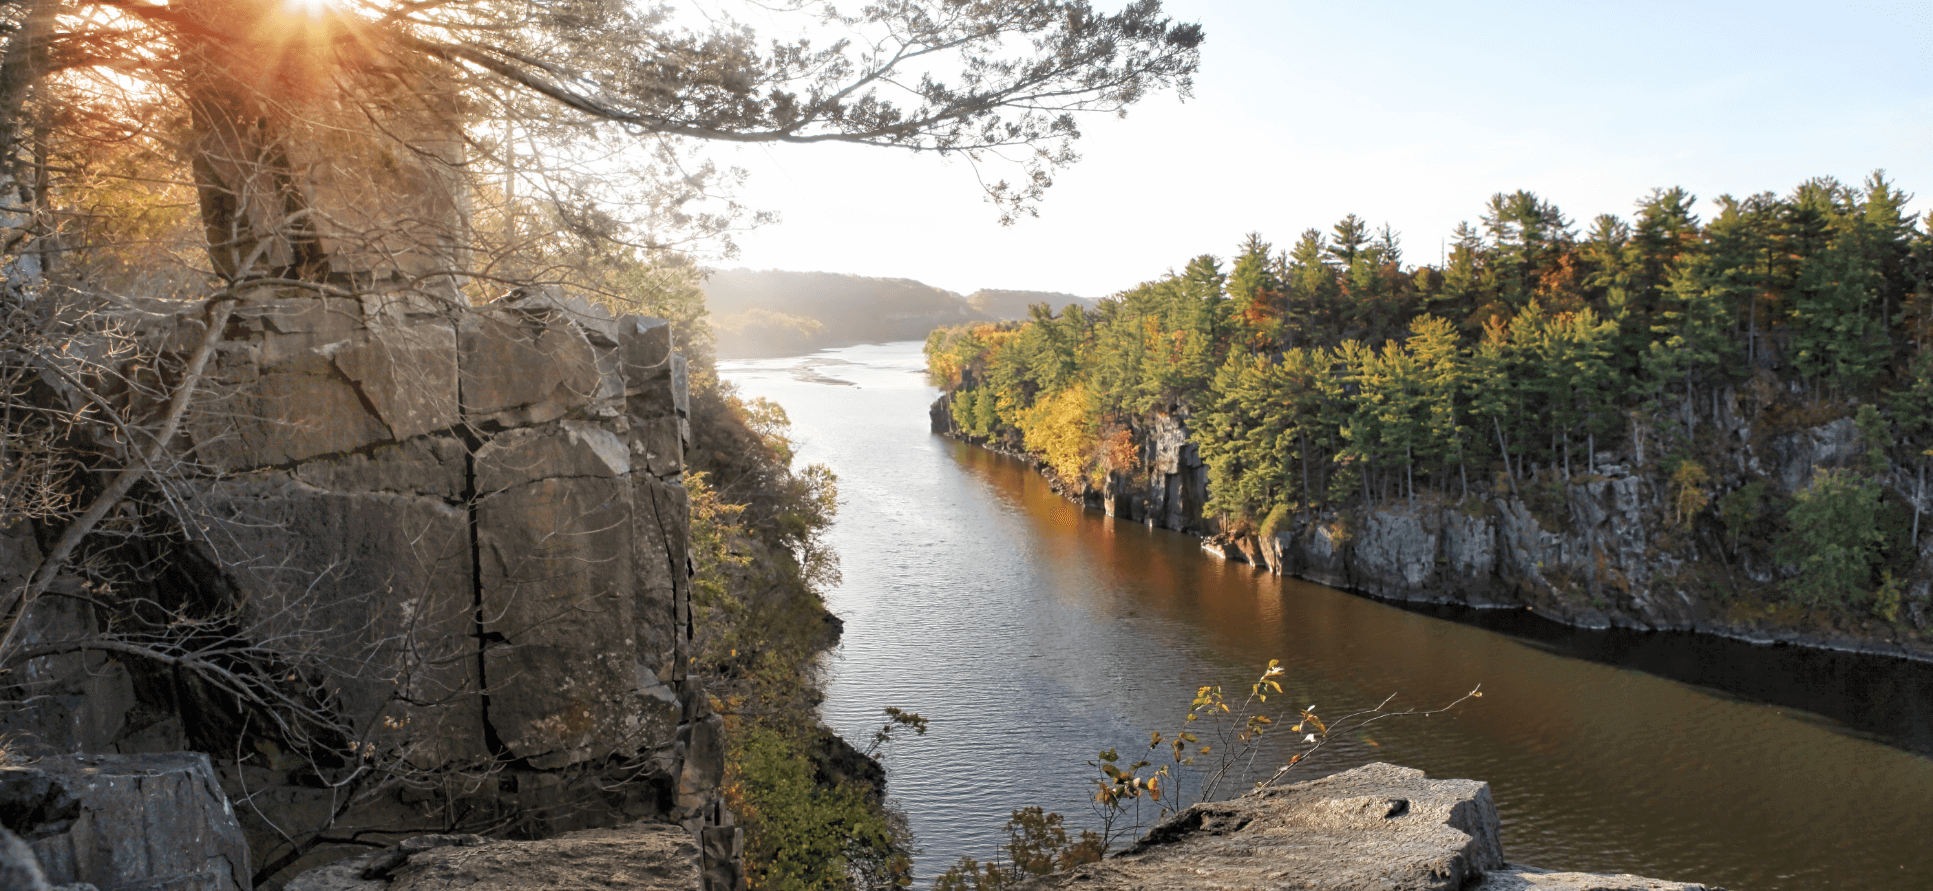 Autumn sunset from a tall cliff overlooking a river.